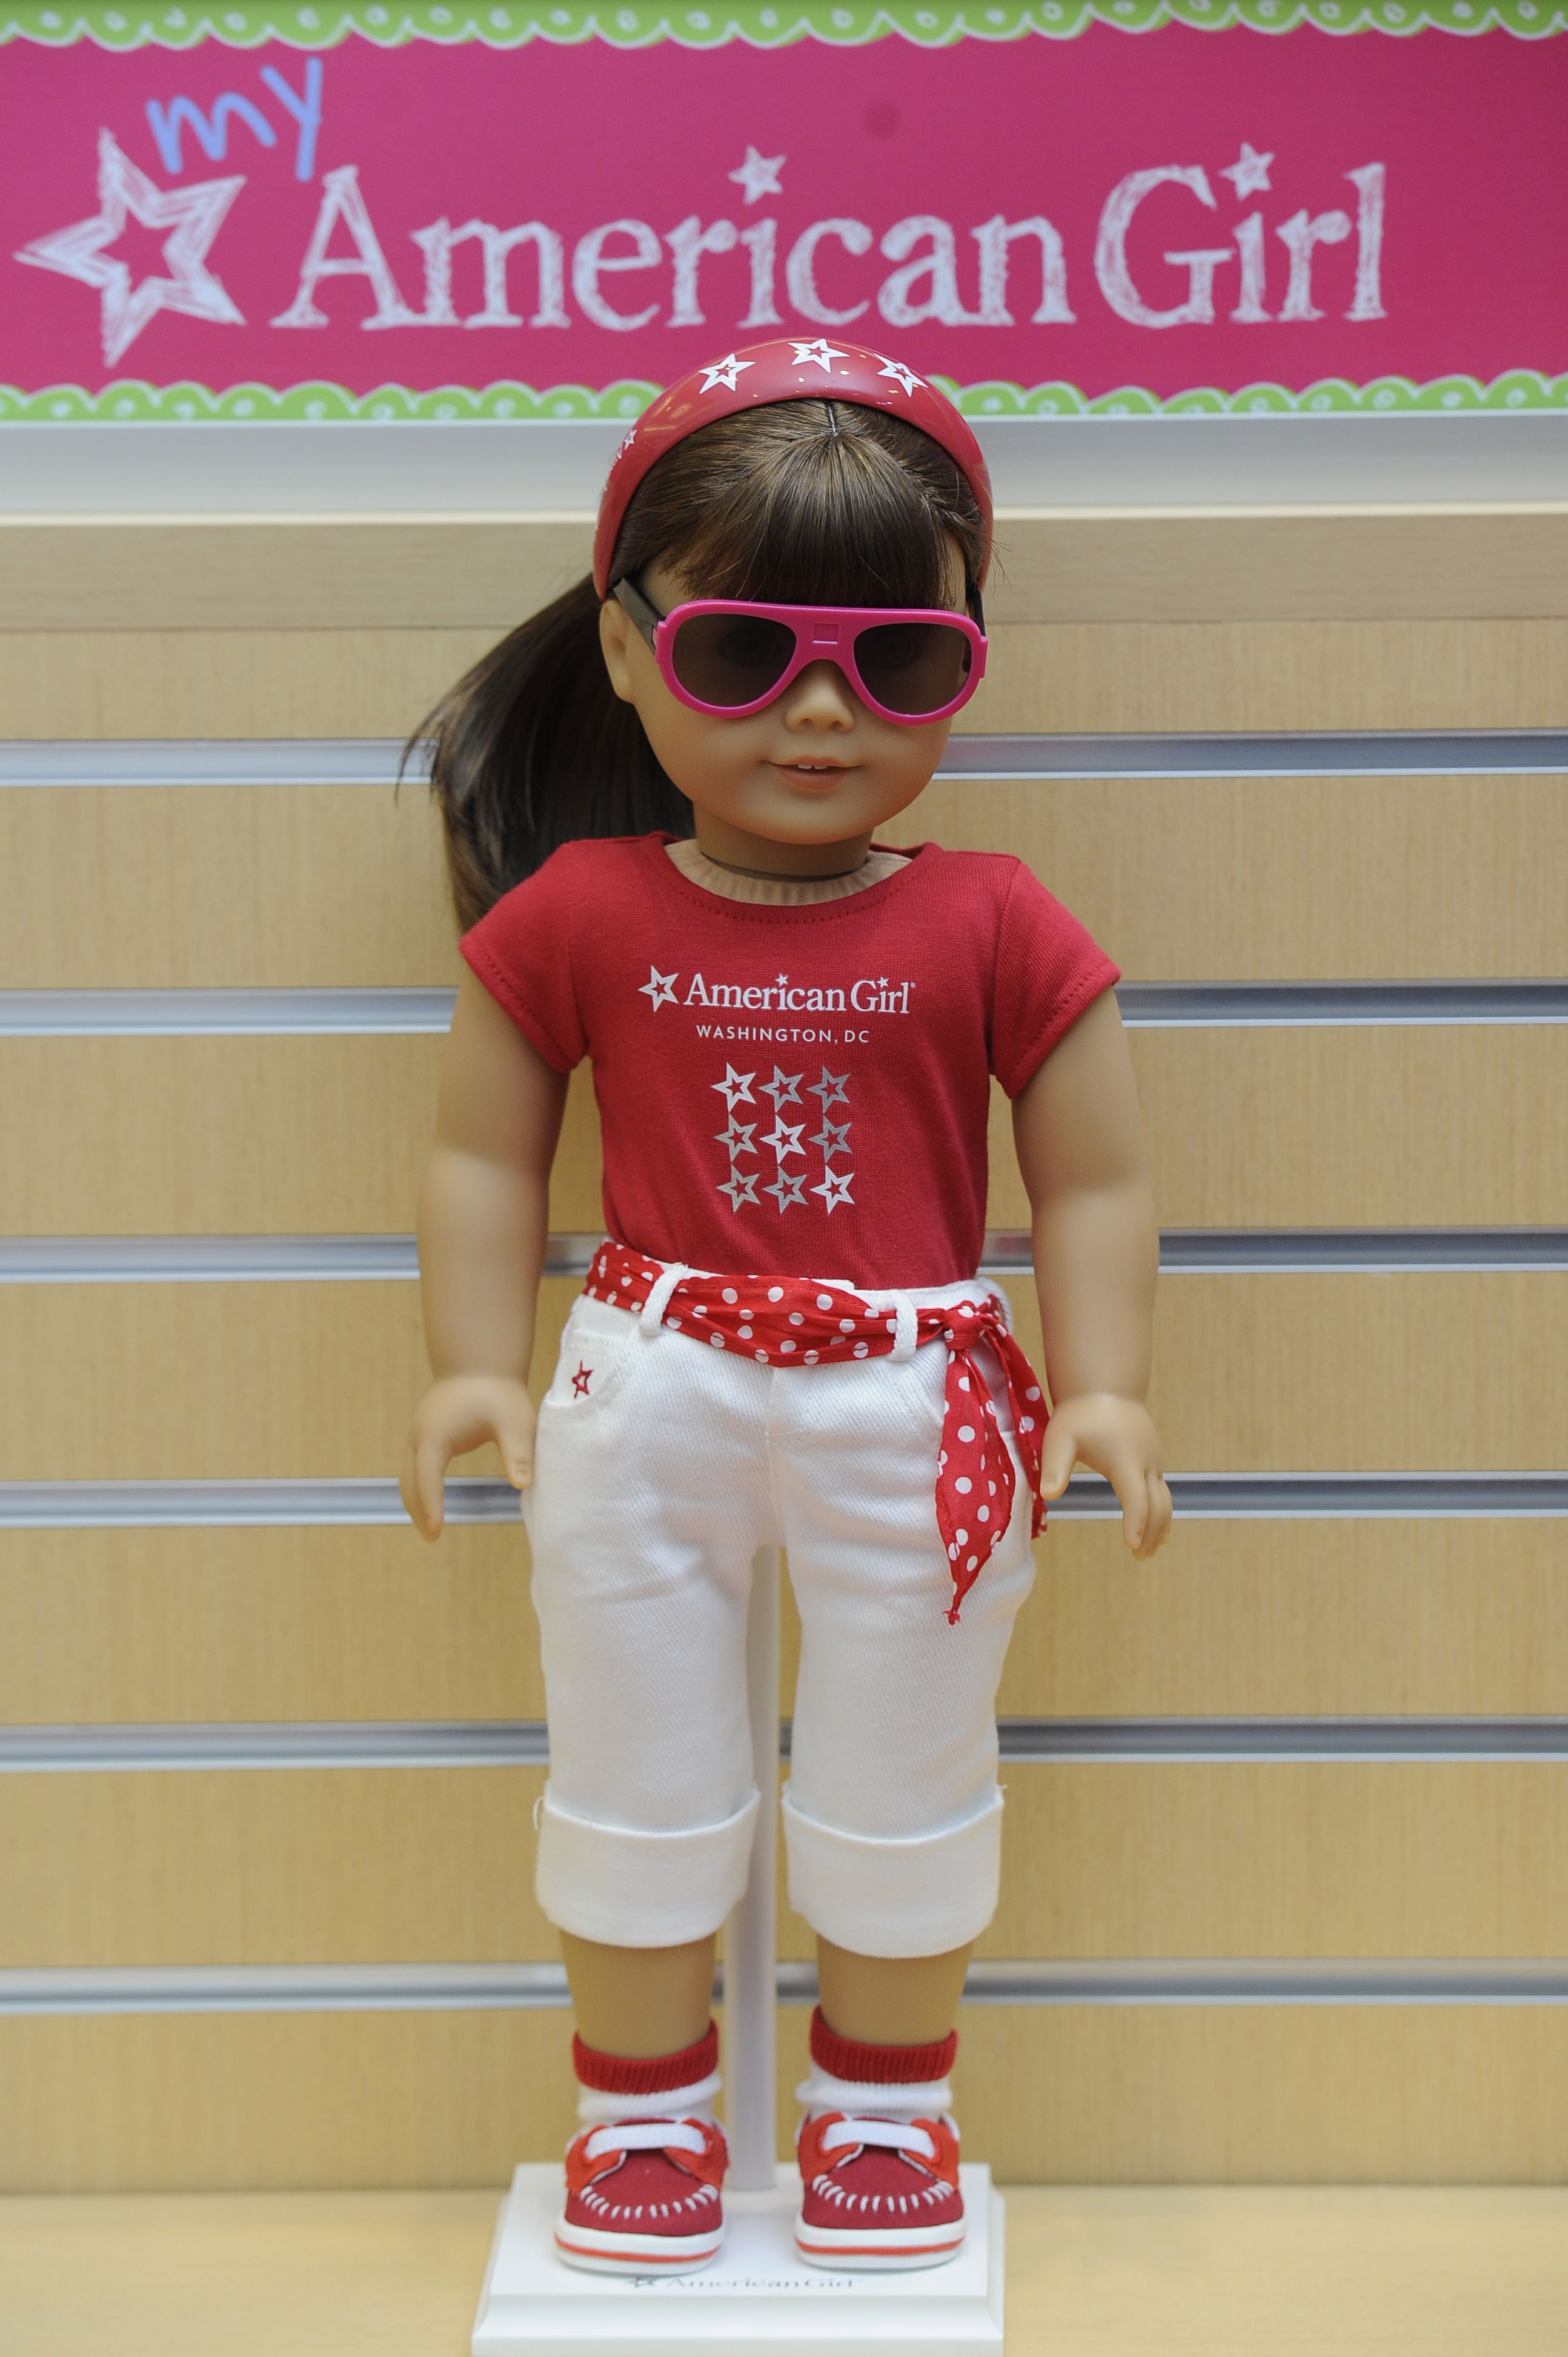 mclean, va june 6 a doll wearing an american girl washington, dc shirt is seen at the american girl washington, dc store at tysons corner center on monday june 6, 2011 in mclean, va photo by matt mcclainfor the washington post via getty images